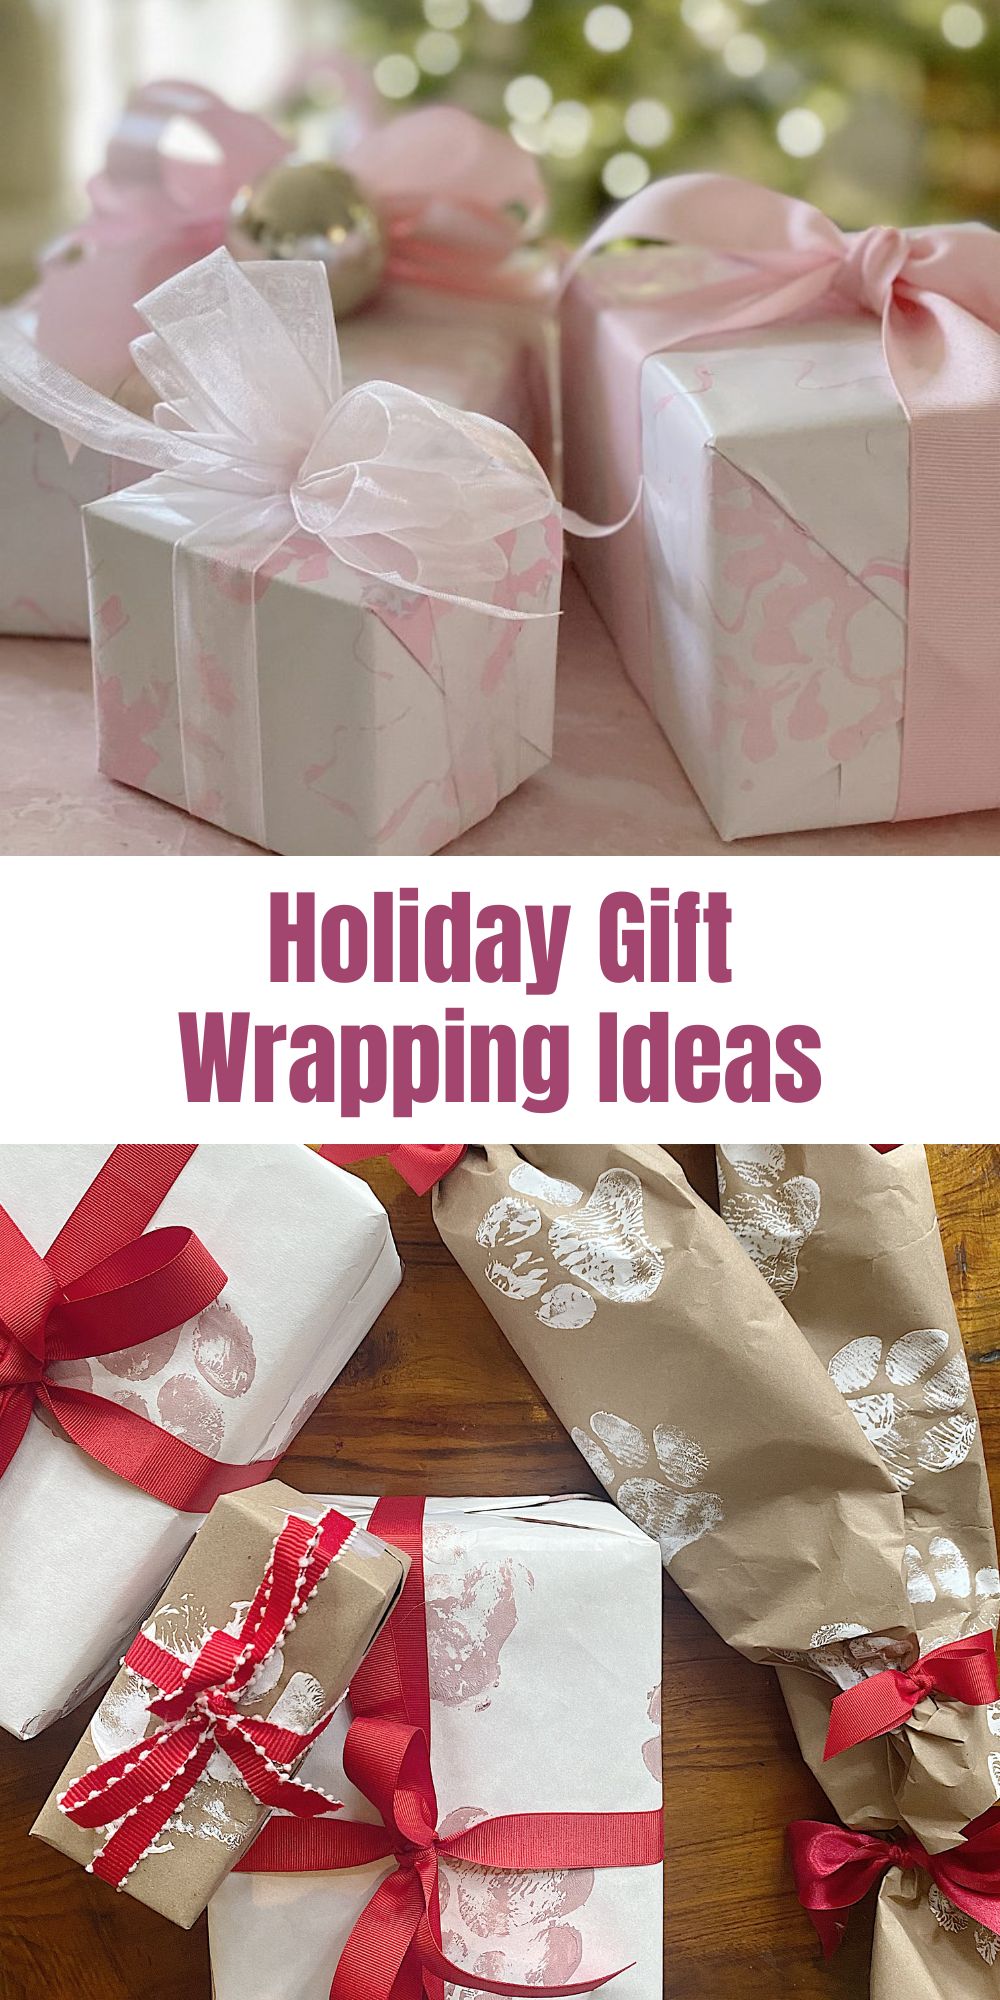 Welcome to day six of Twelve Days To Get Ready For Christmas. Today I am sharing holiday gift wrapping ideas for paper, ribbon, tags, and a gift wrapping station!